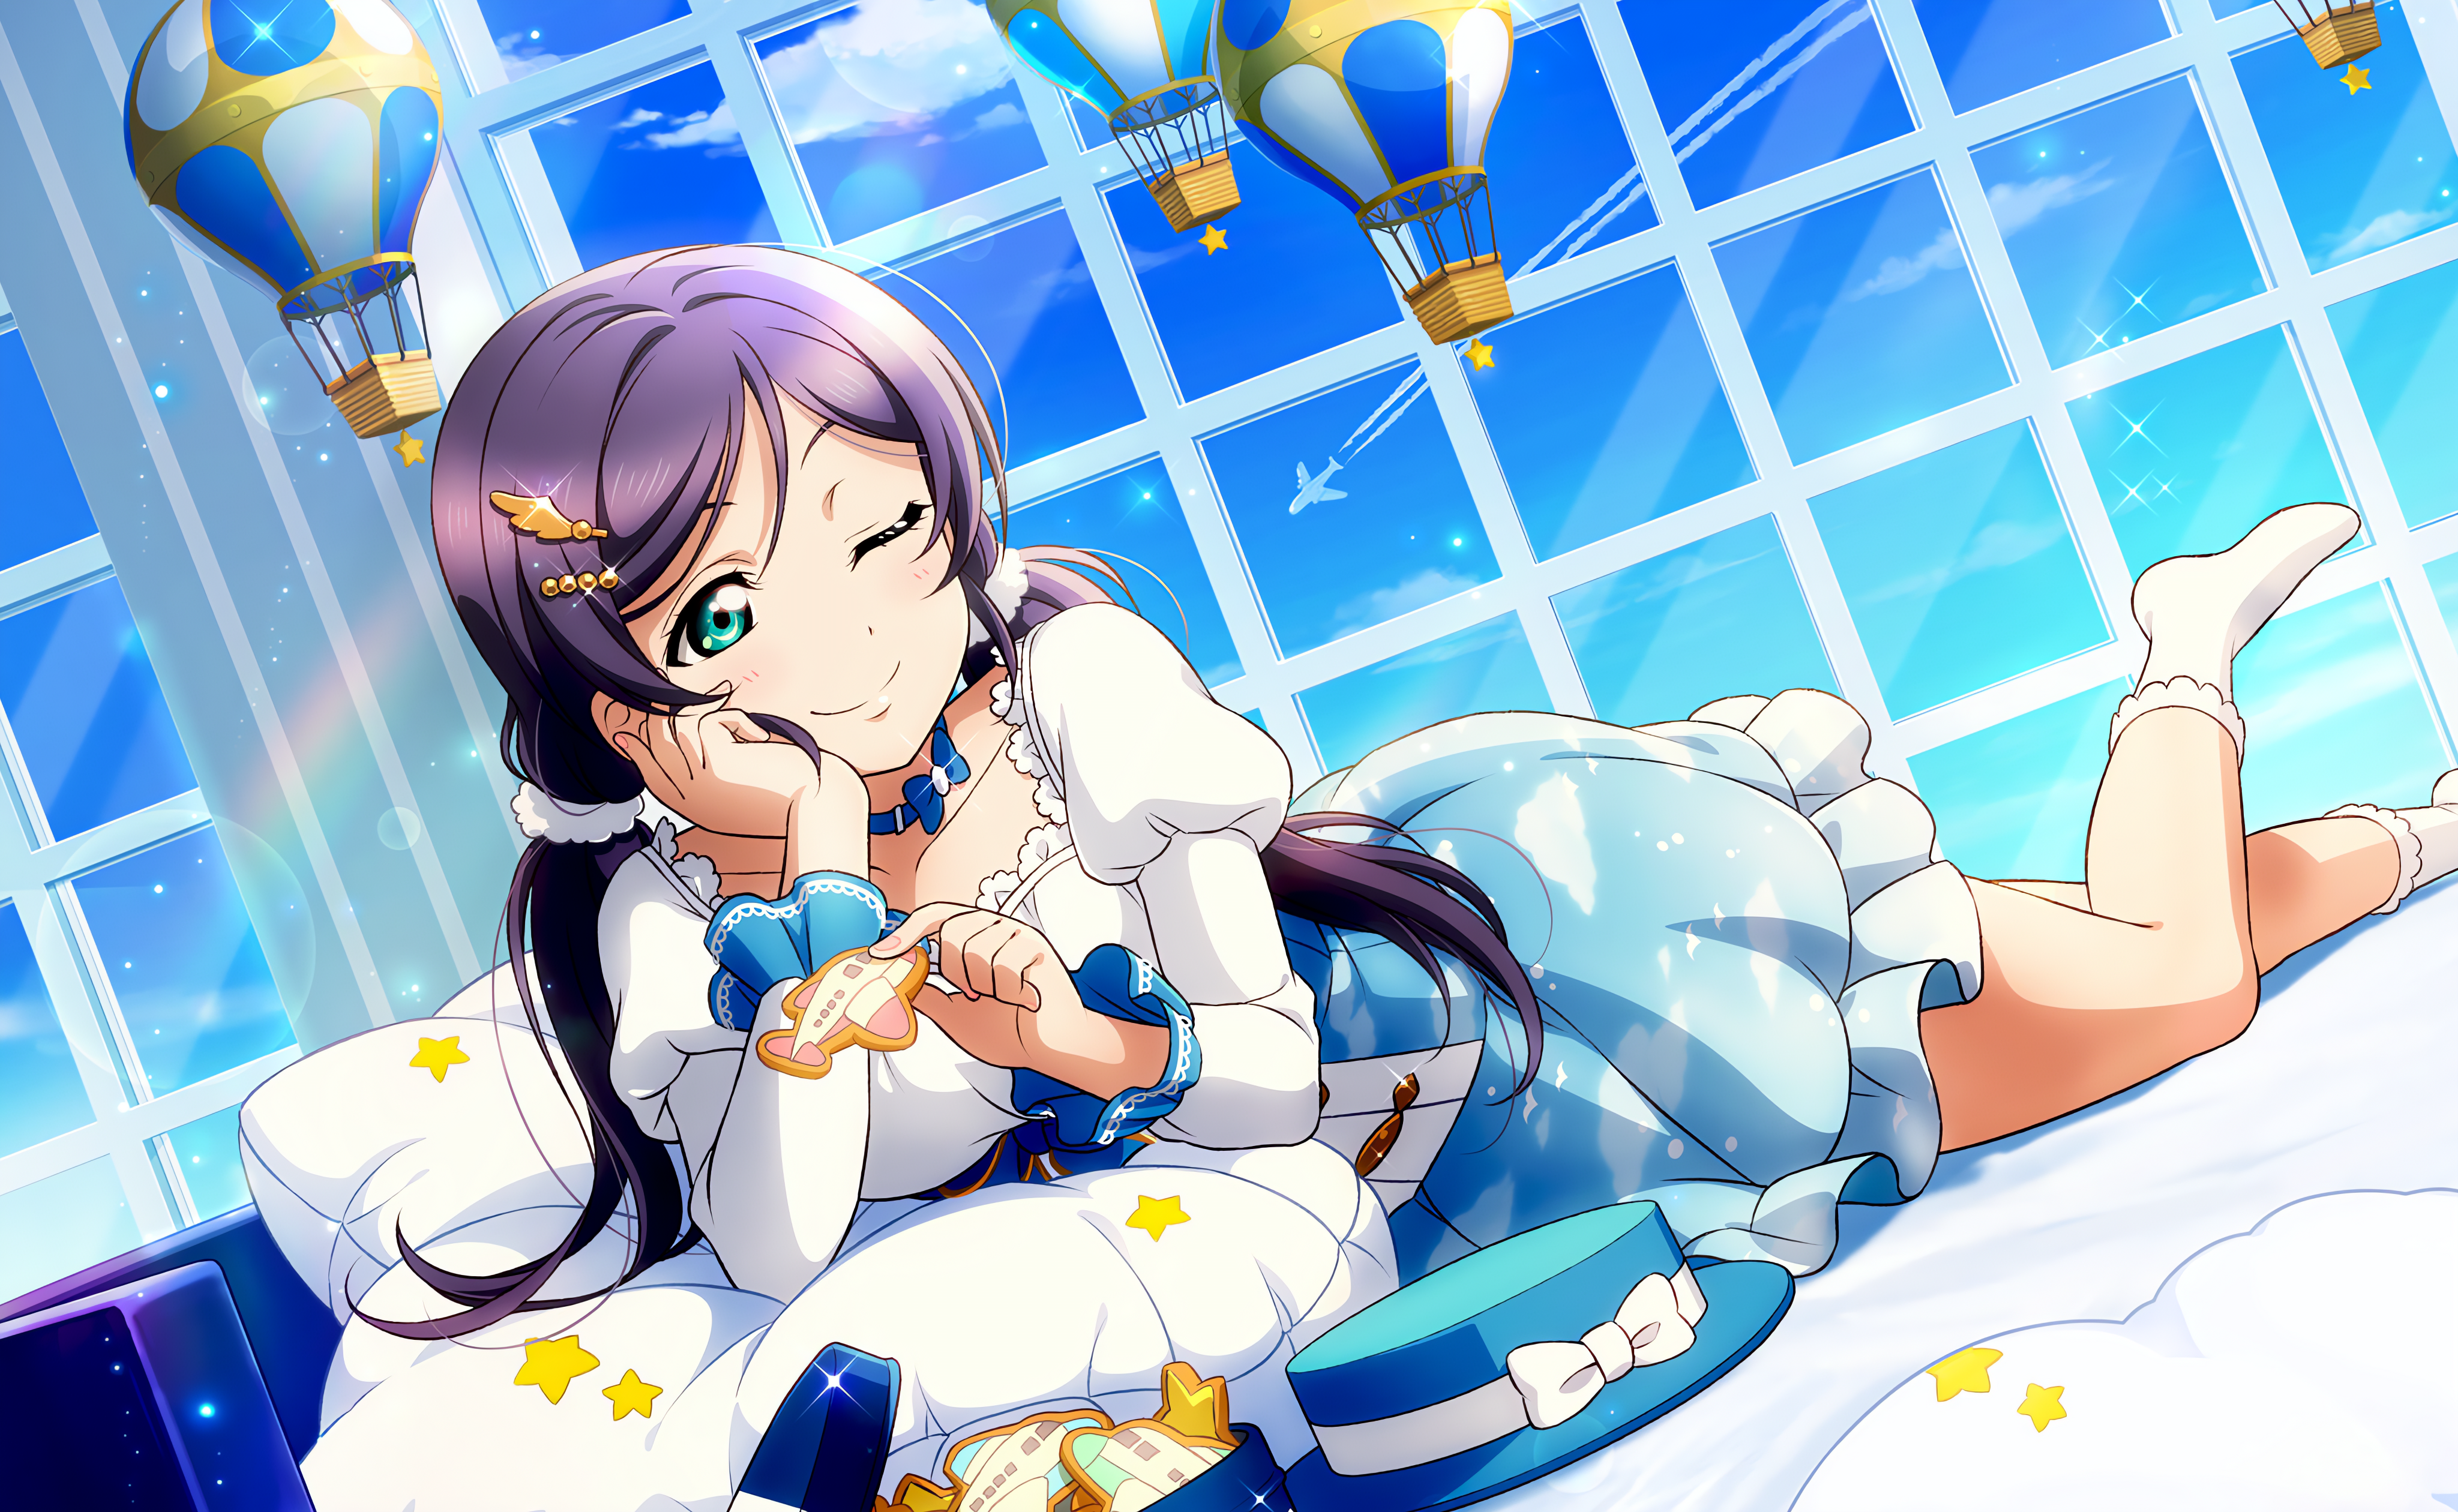 Anime 4096x2520 Toujou Nozomi Love Live! anime anime girls smiling one eye closed socks long hair twintails window sky clouds stars aircraft airplane hot air balloons pillow hat bow tie hand on face choker